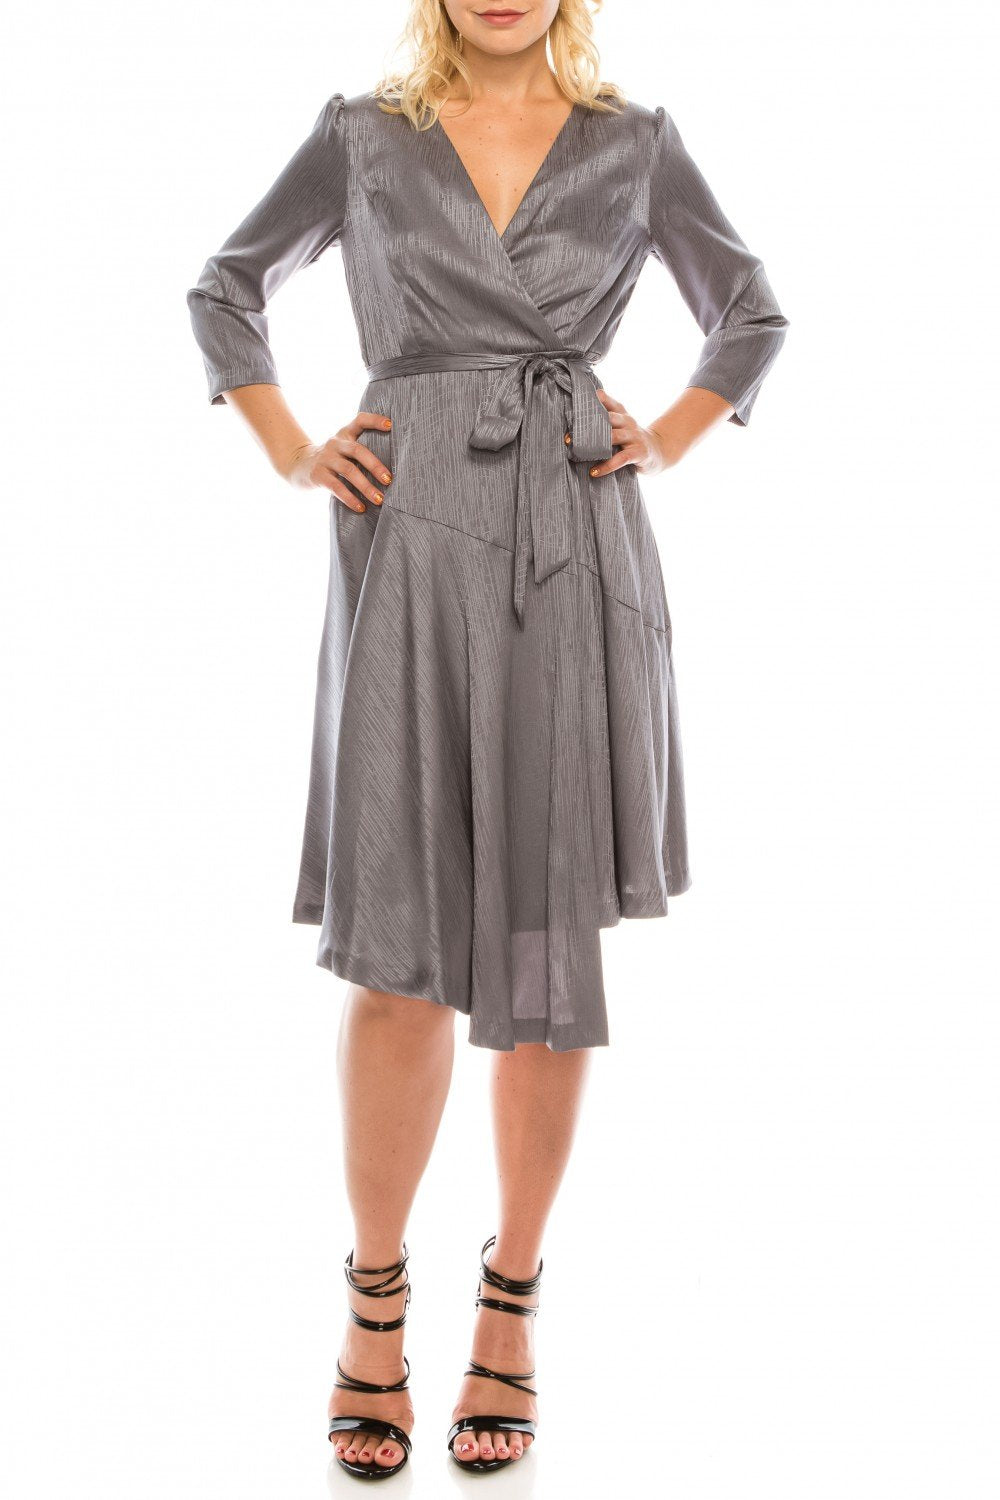 London Times - T4896M Three Quarter Sleeve Twill Faux Wrap Dress In Gray and Silver